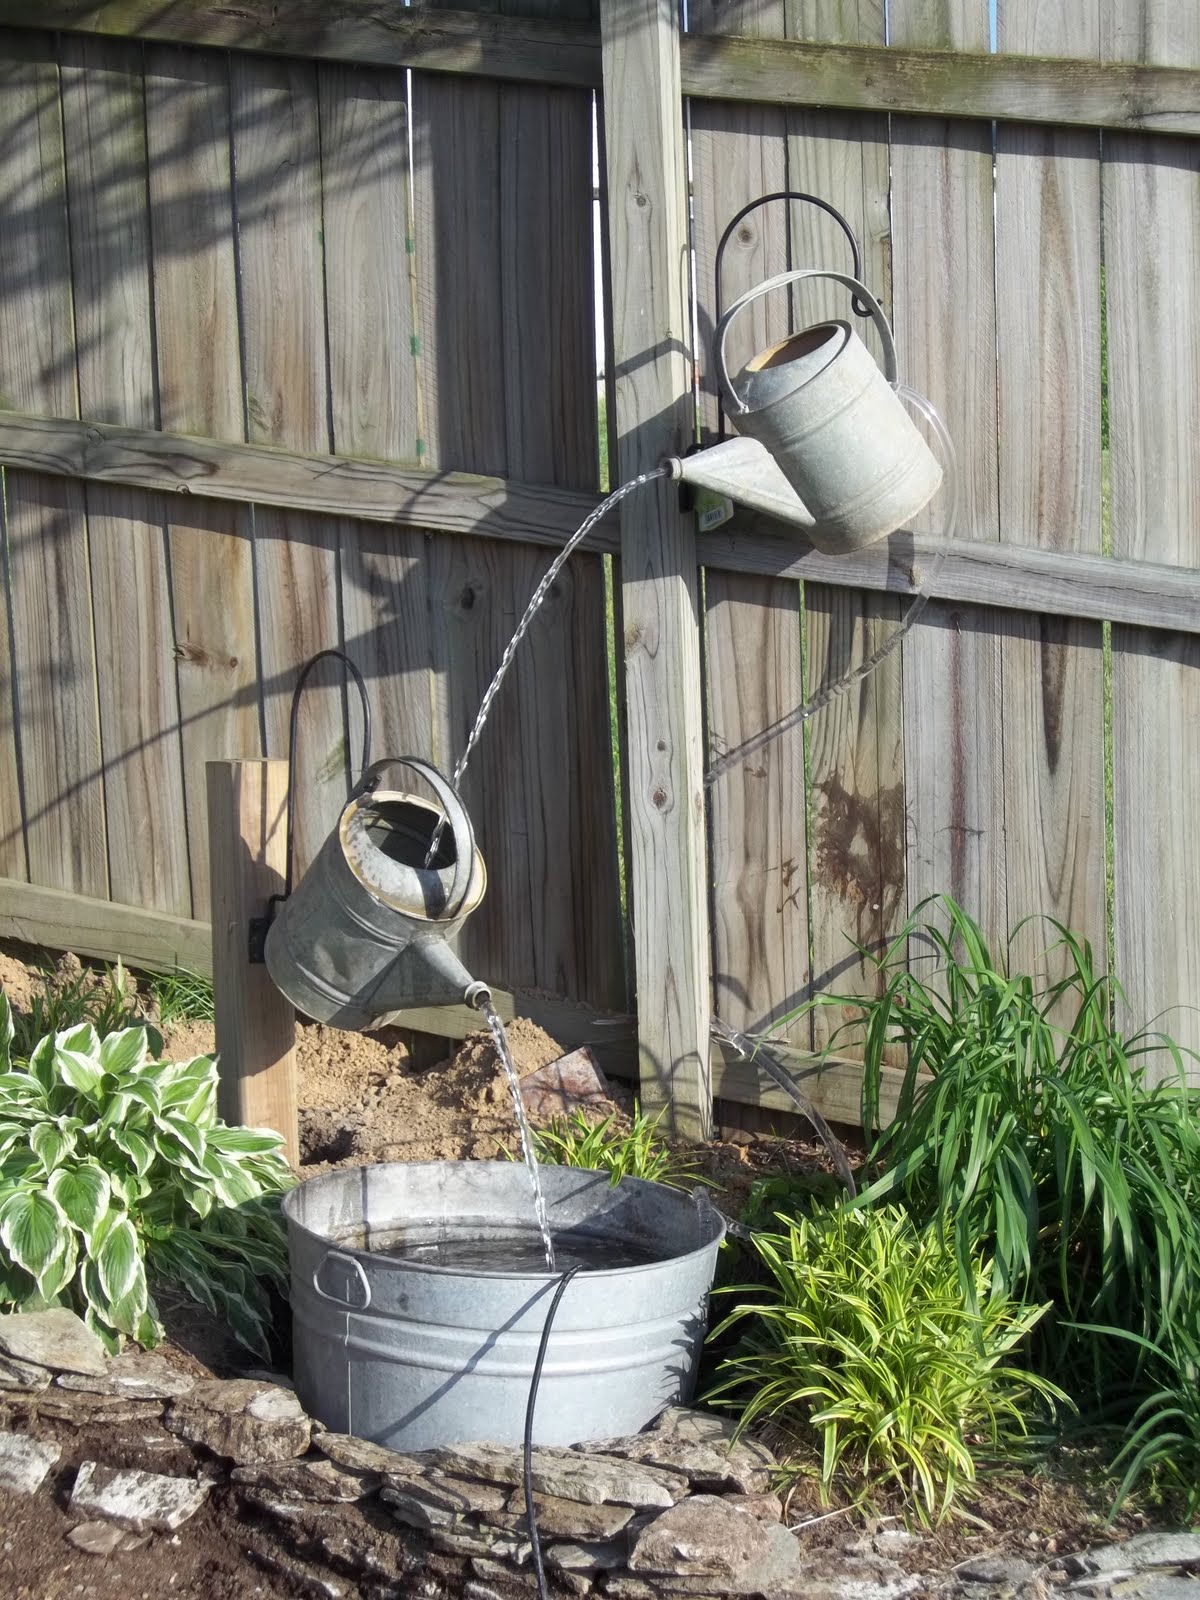 Create a small water feature using your old watering cans and pails